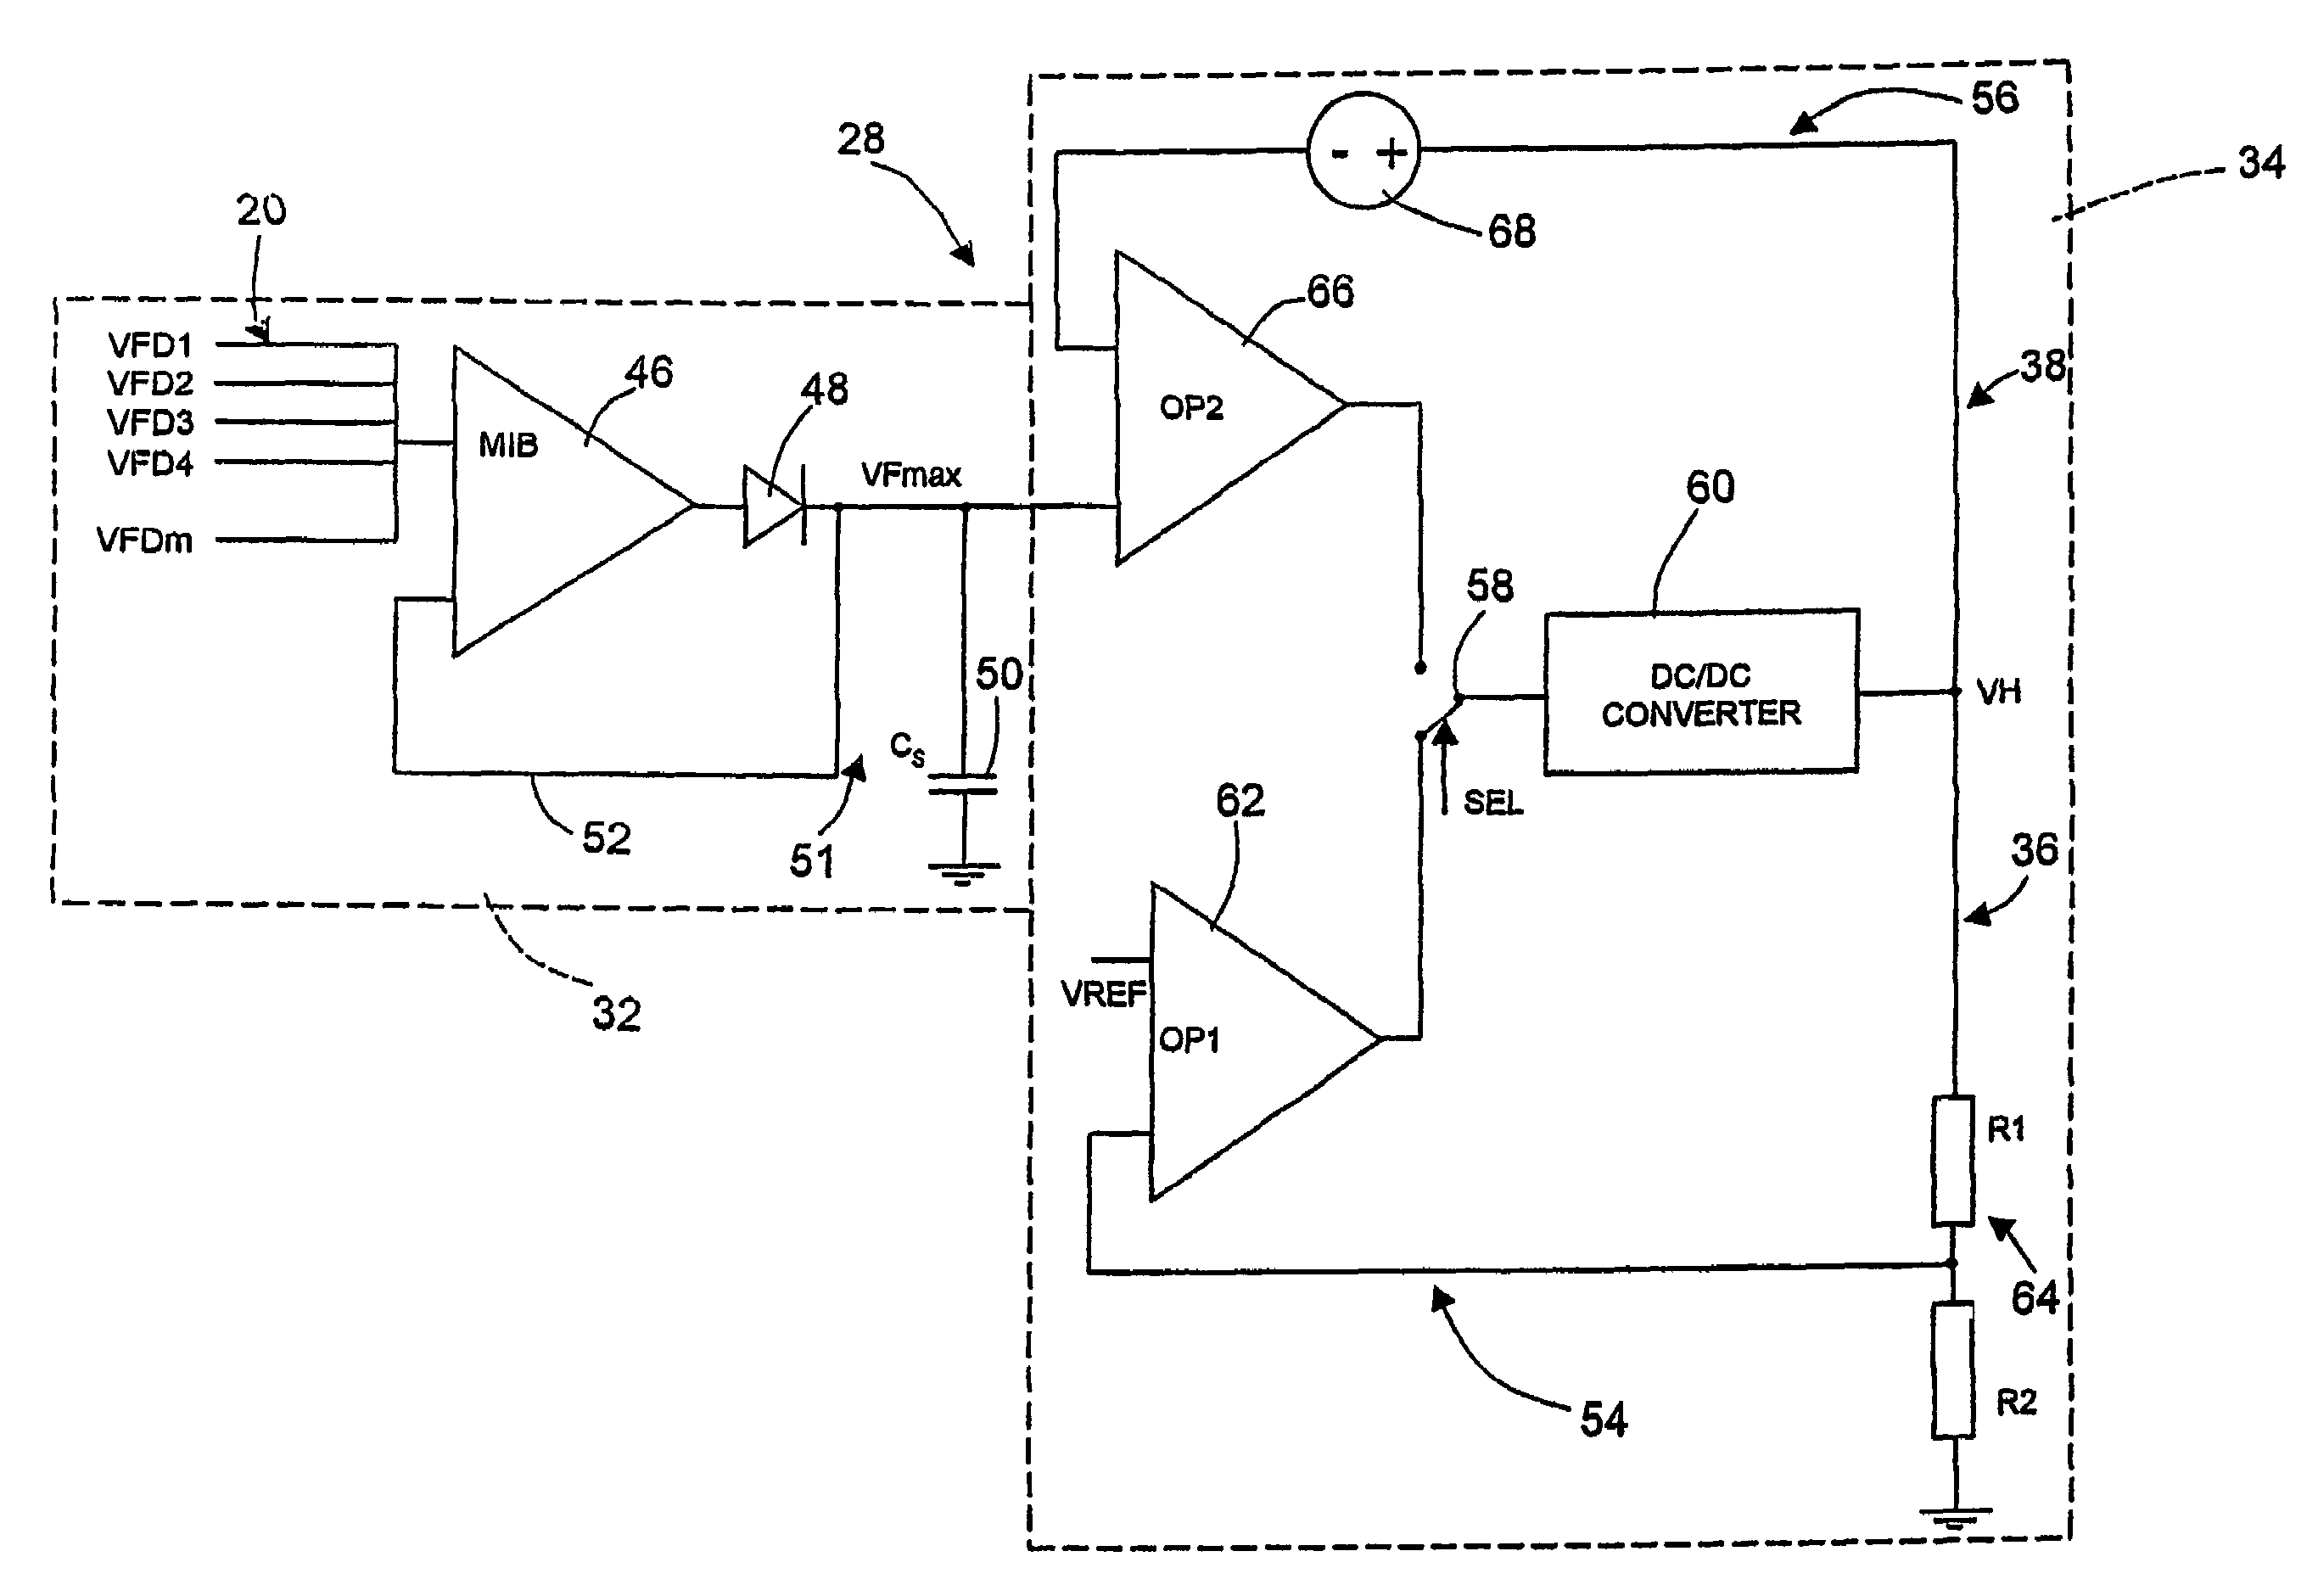 Driver for an OLED passive-matrix display